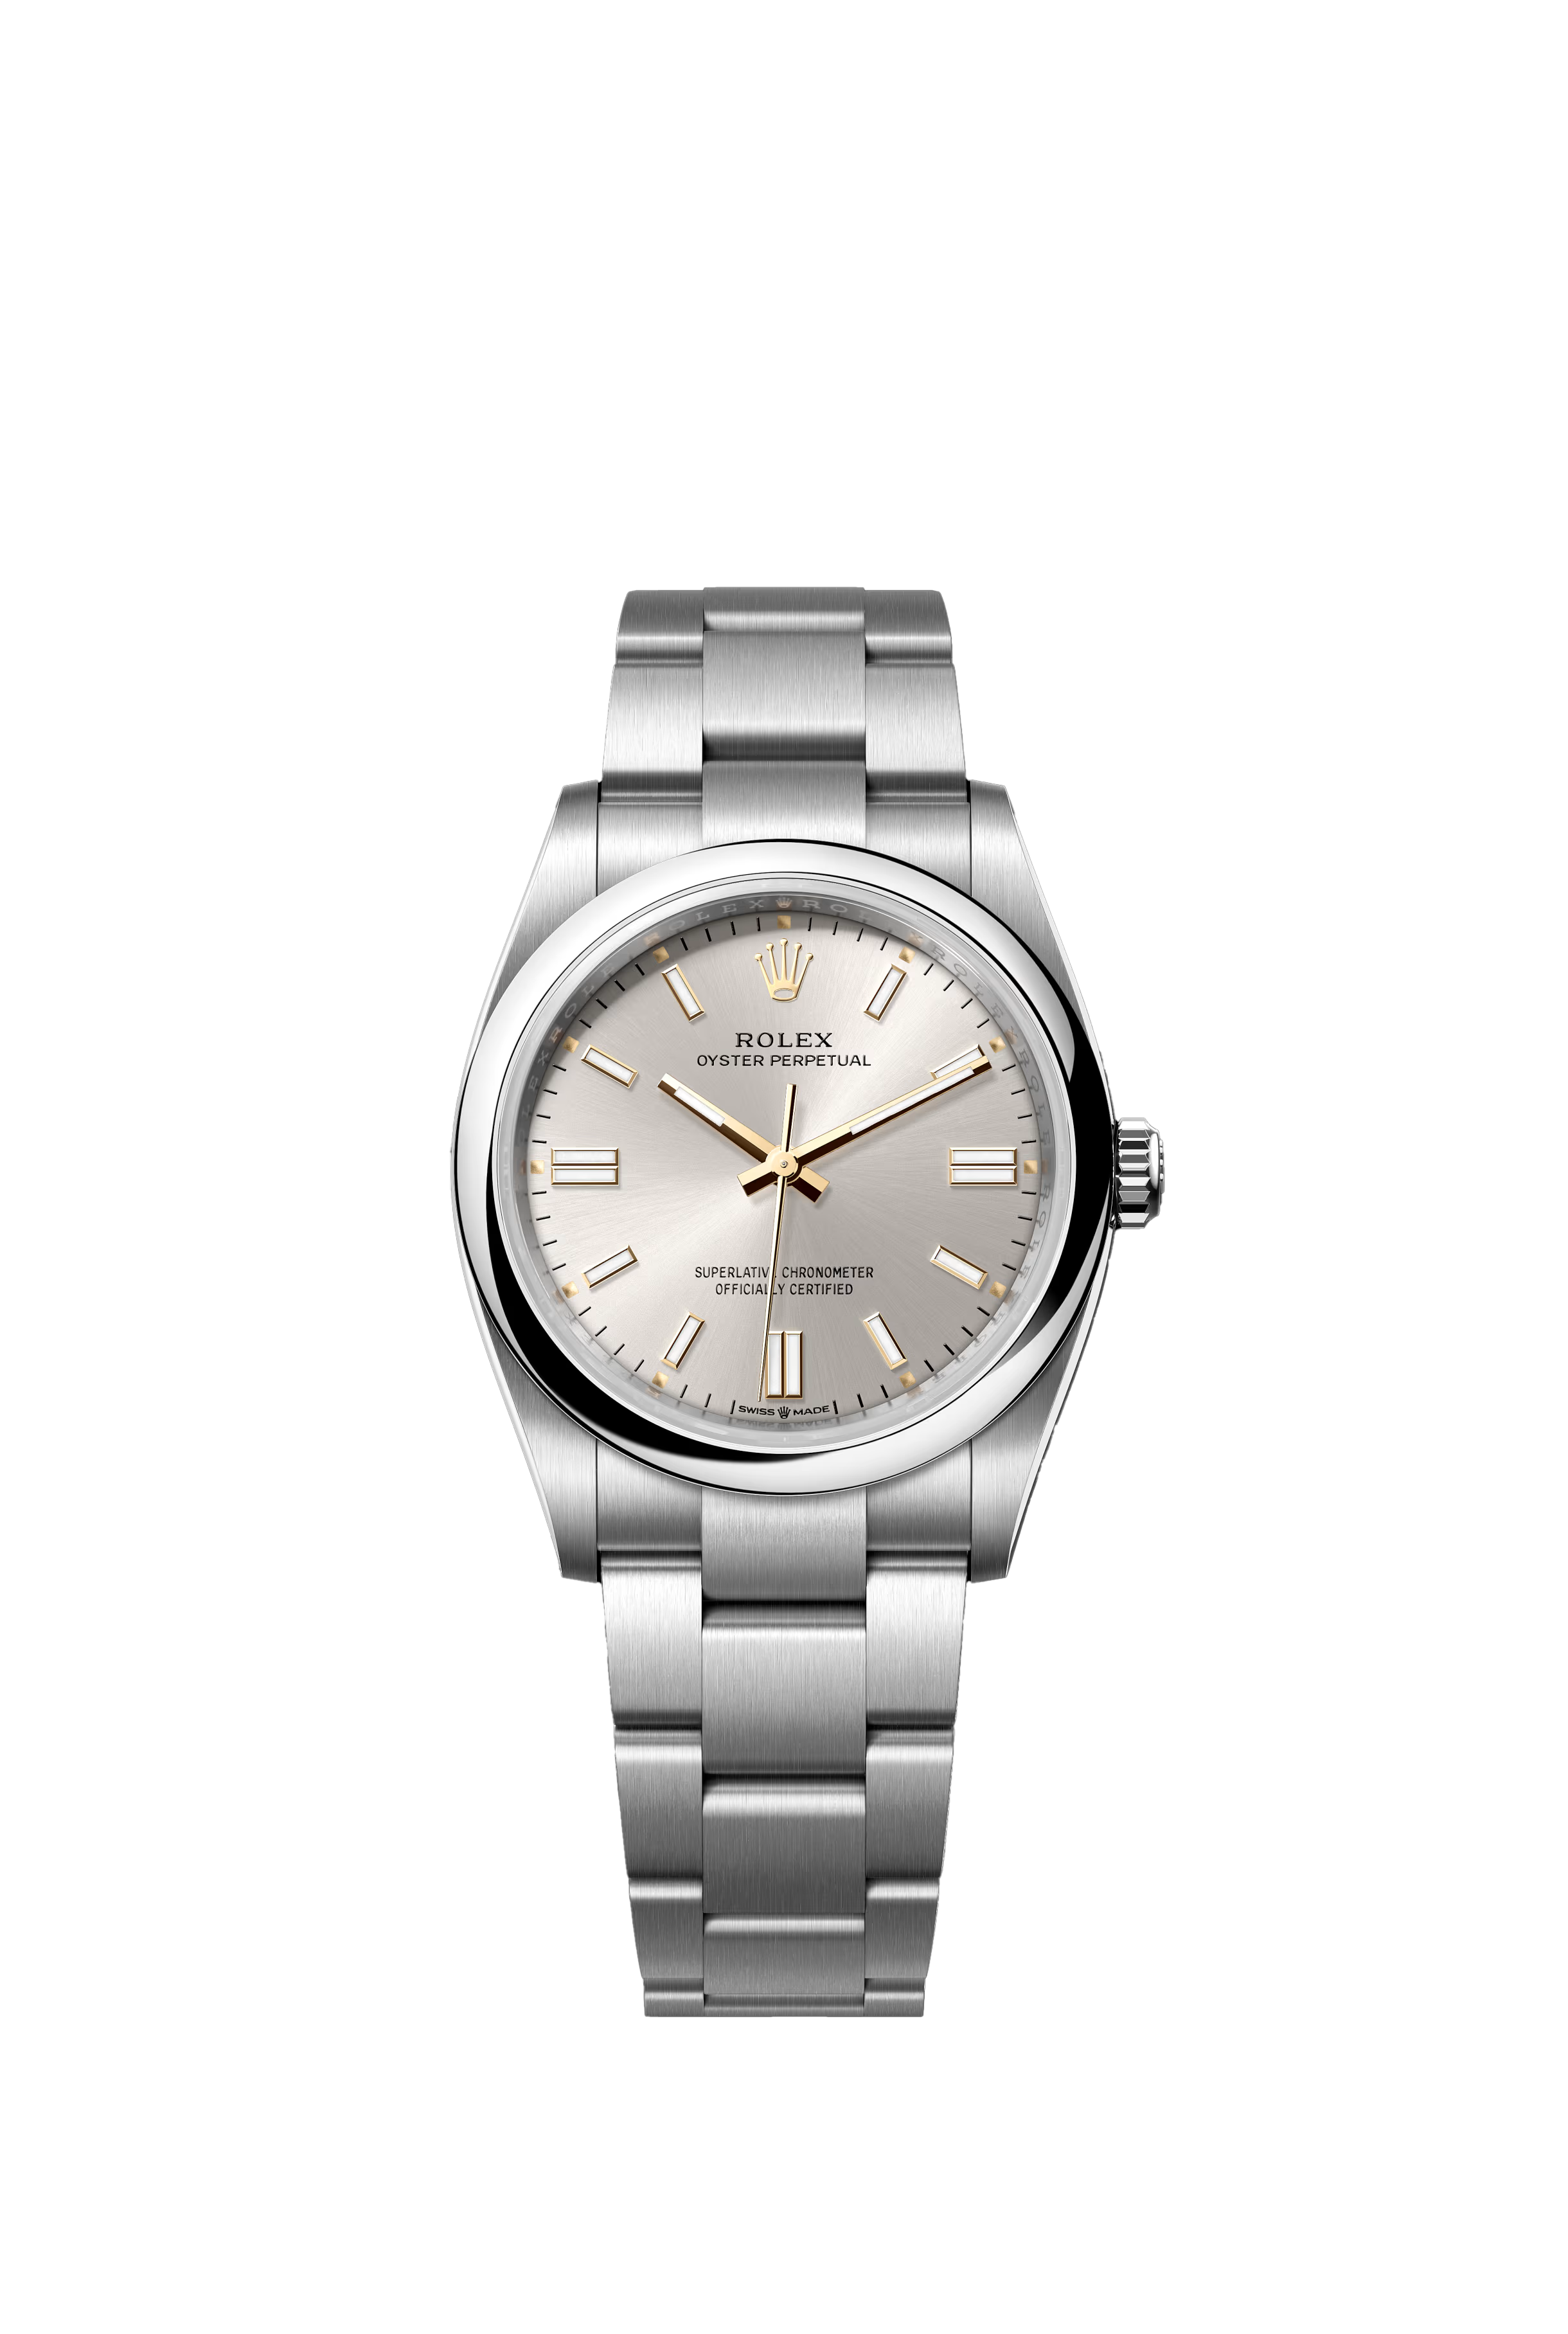 Rolex Oyster Perpetual 36 Oyster, 36 mm, Oystersteel Reference 126000